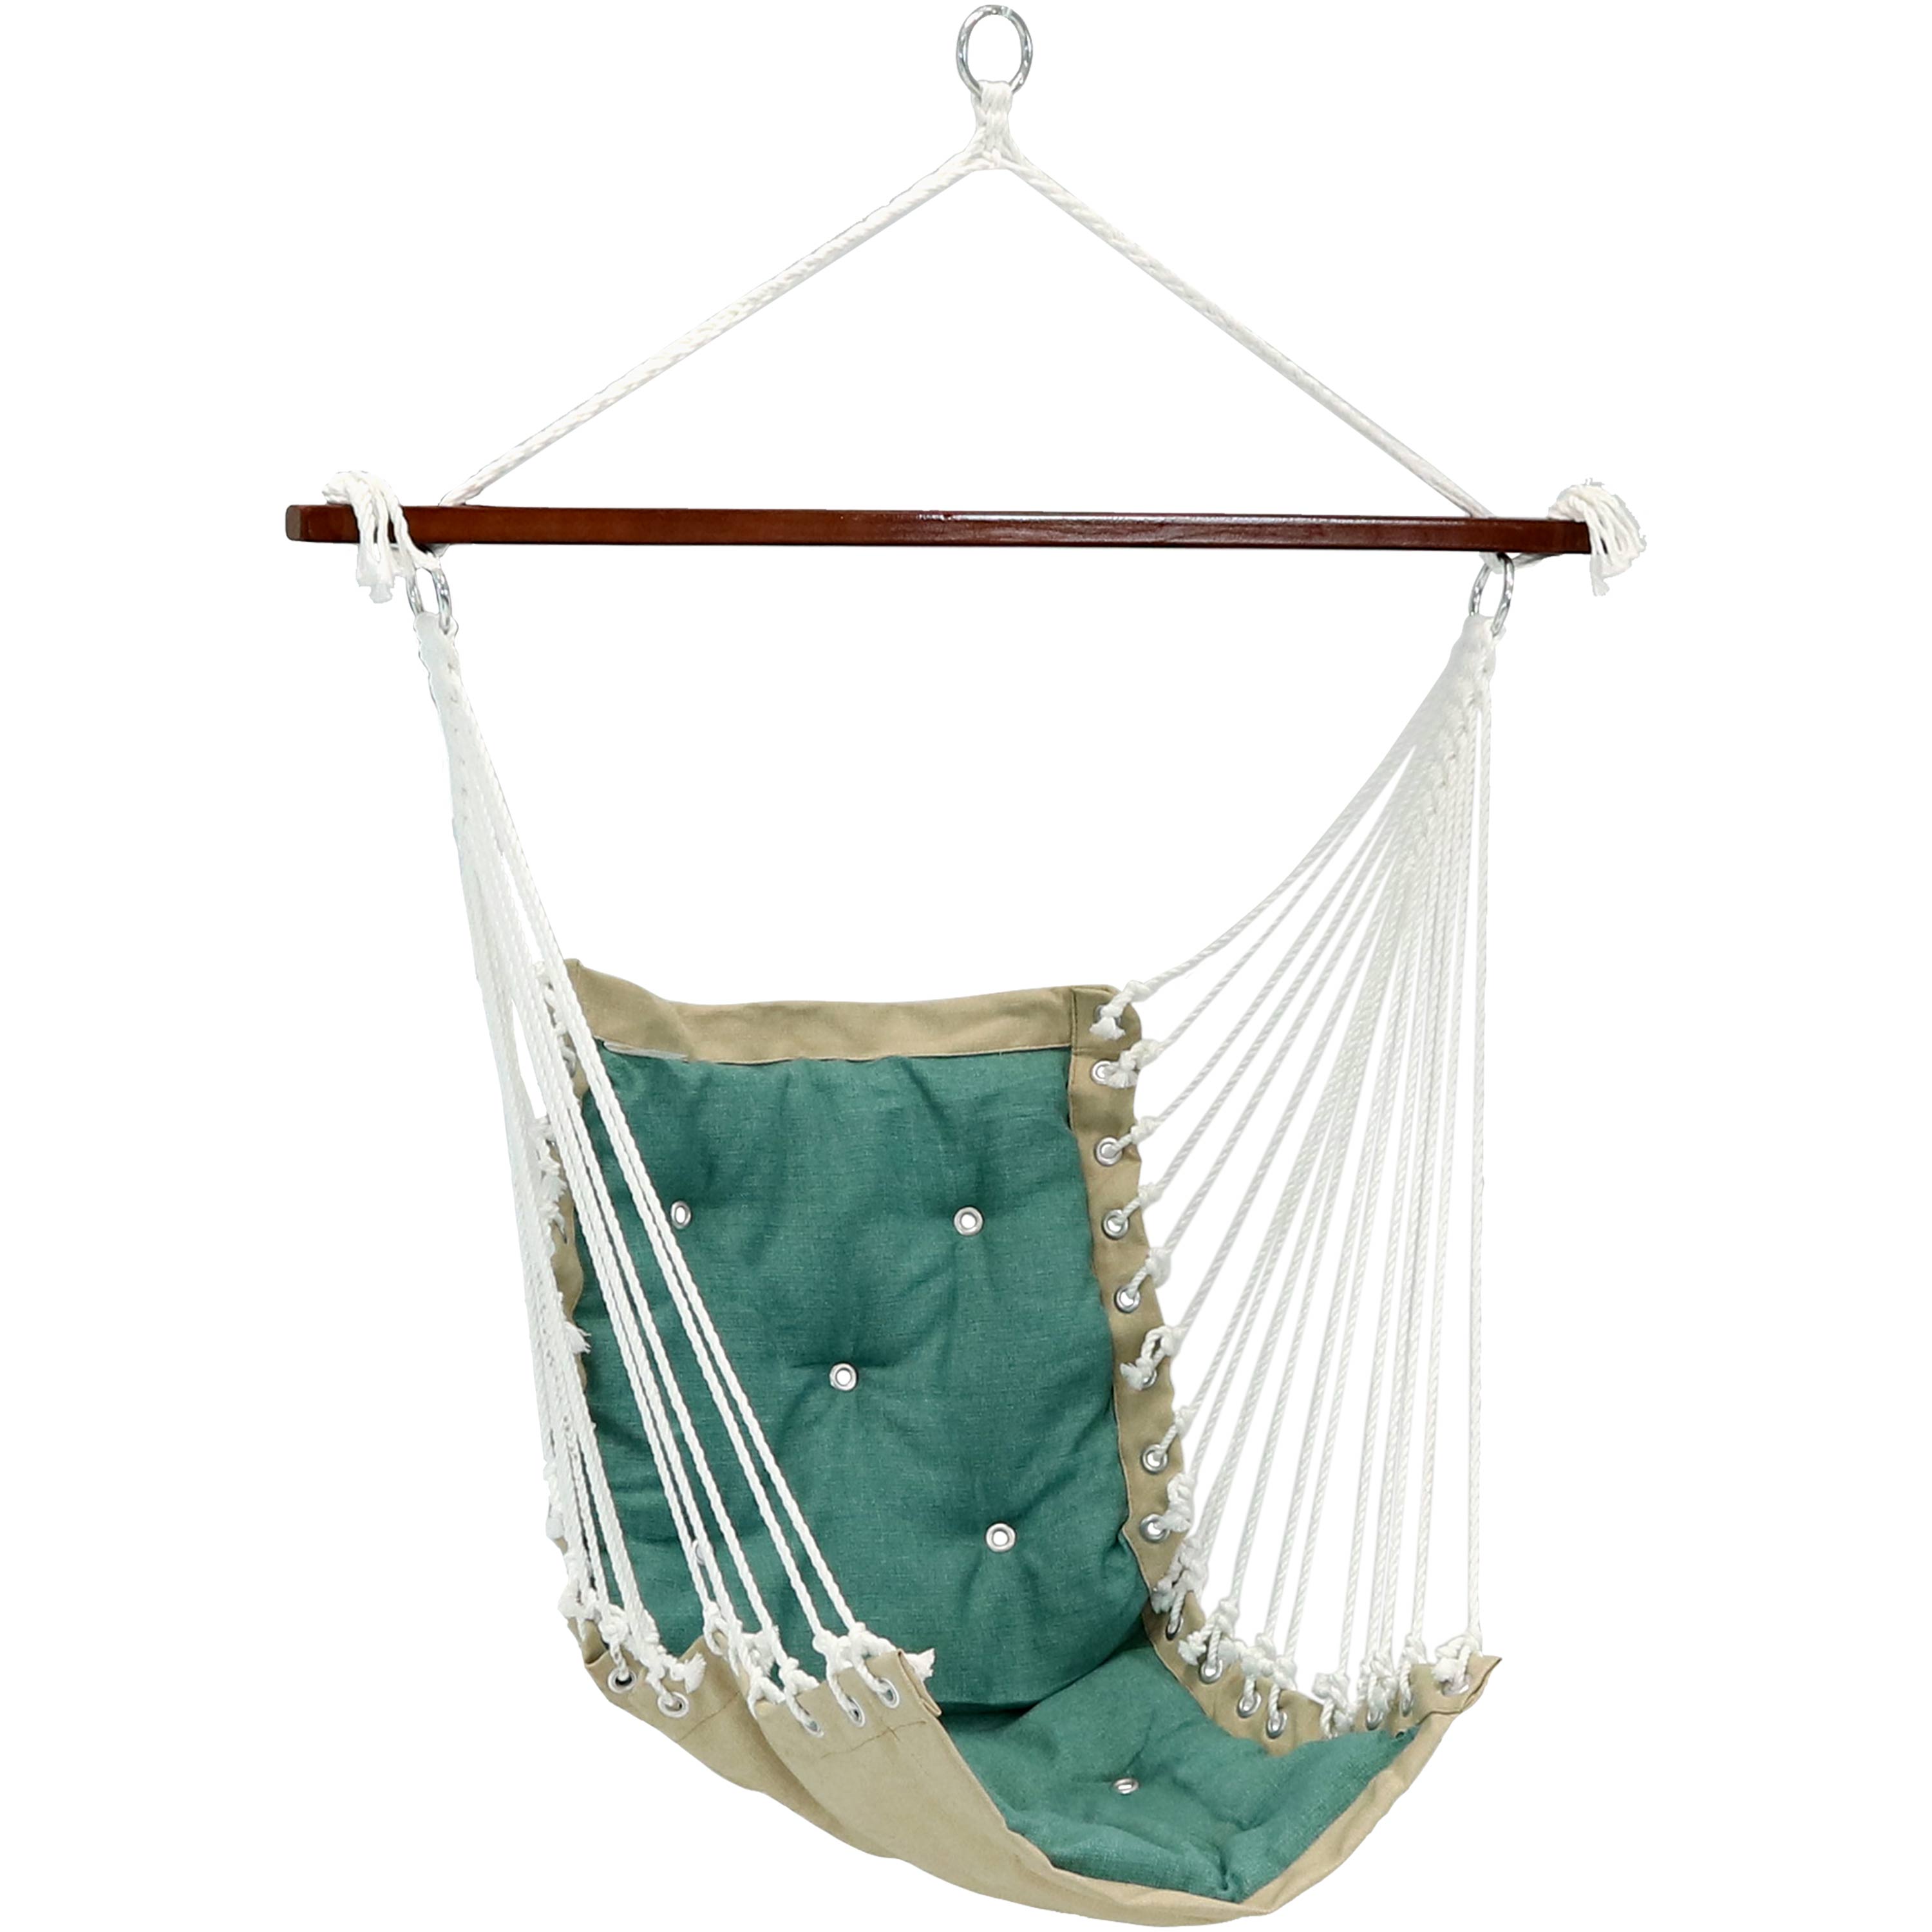 Sunnydaze Tufted Victorian Hammock Swing for Outdoor Use, 300-Pound Weight Capacity, Sea Grass